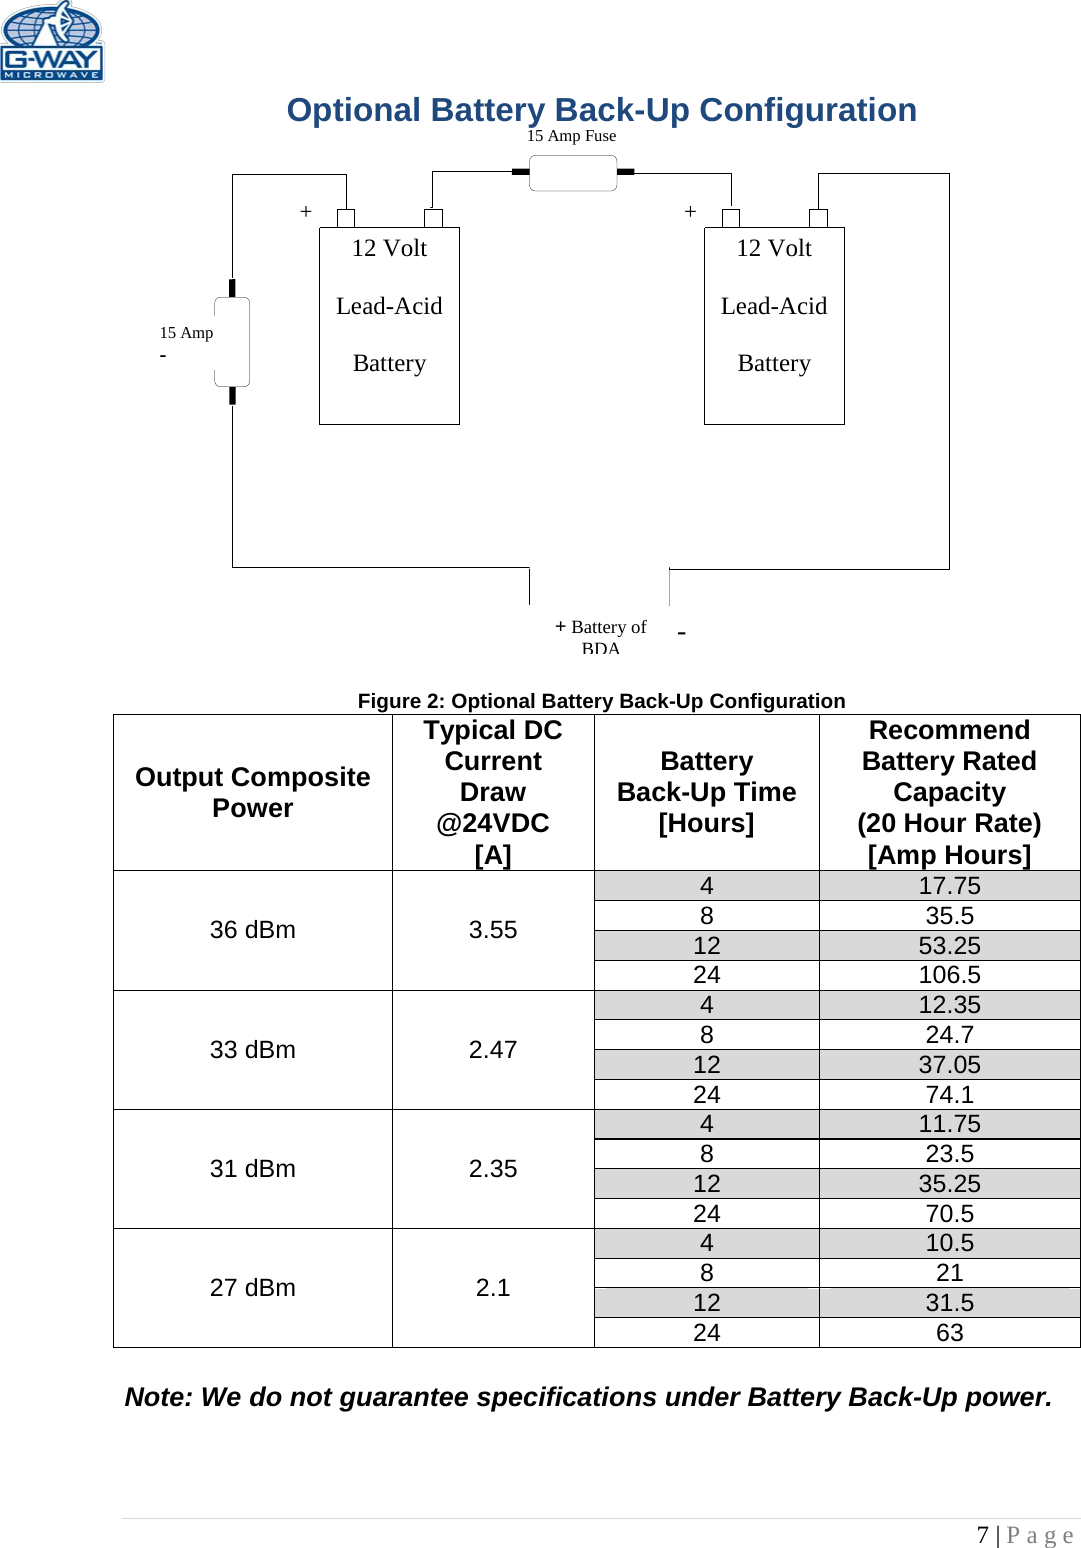   7 | Page  15 Amp Fuse 15 Amp -       12 Volt  Lead-Acid  Battery  12 Volt  Lead-Acid  Battery  + + + Battery of  BDA - Optional Battery Back-Up Configuration                  Figure 2: Optional Battery Back-Up Configuration Output Composite Power Typical DC Current  Draw @24VDC [A] Battery Back-Up Time [Hours] Recommend Battery Rated Capacity (20 Hour Rate) [Amp Hours] 36 dBm 3.55 4 17.75 8 35.5 12 53.25 24 106.5 33 dBm 2.47 4 12.35 8 24.7 12 37.05 24 74.1 31 dBm  2.35 4 11.75 8 23.5 12 35.25 24 70.5 27 dBm 2.1 4 10.5 8 21 12 31.5 24 63  Note: We do not guarantee specifications under Battery Back-Up power.  